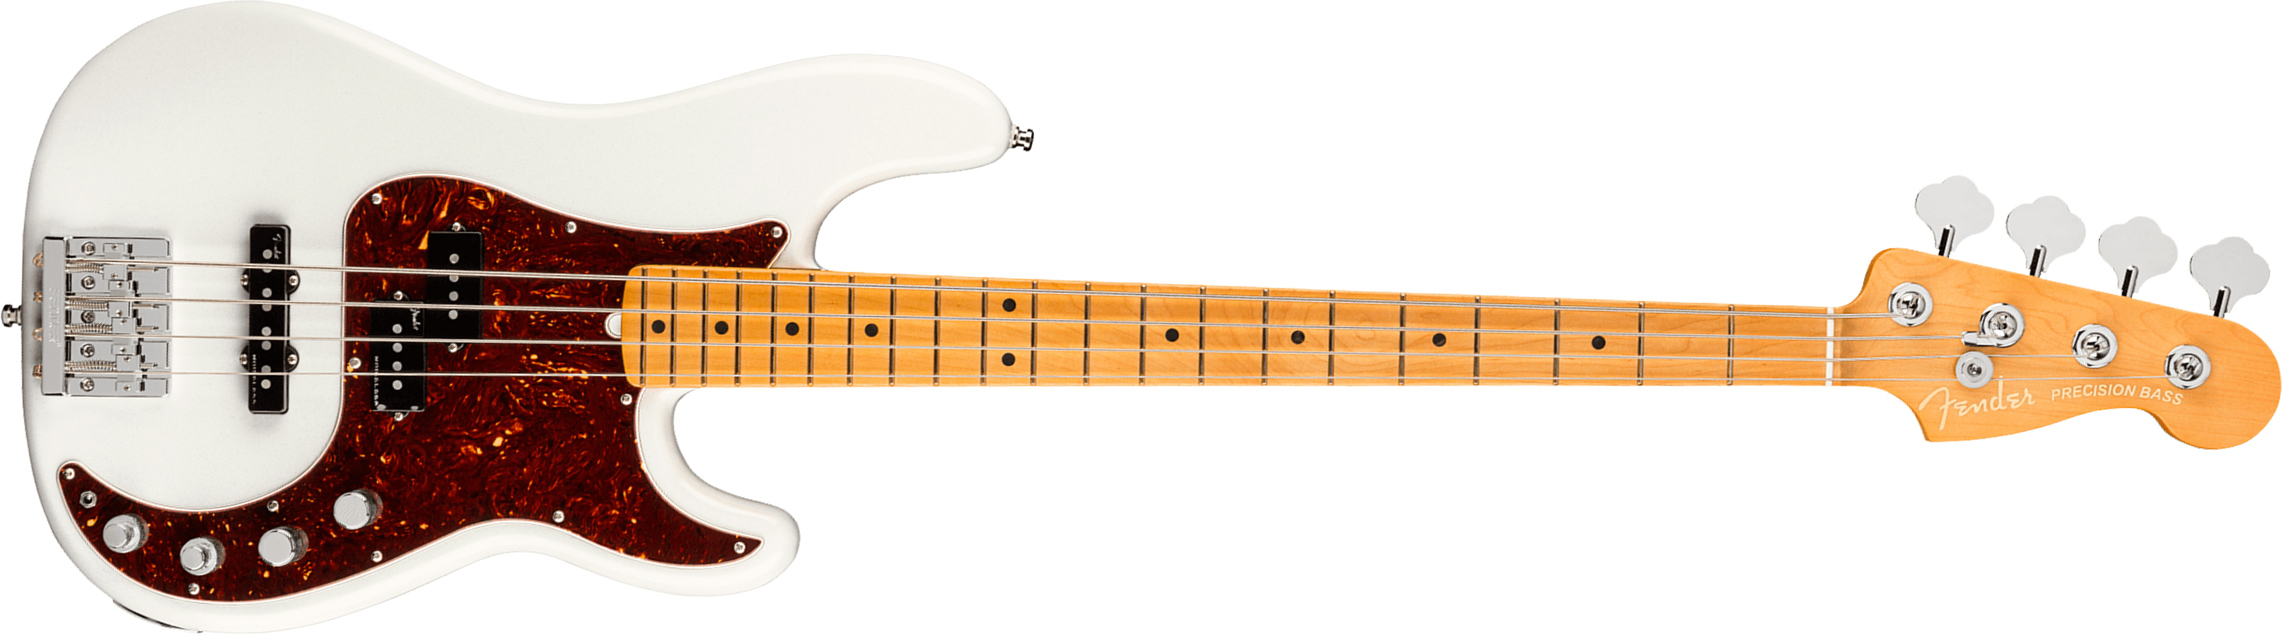 Fender Precision Bass American Ultra 2019 Usa Mn - Arctic Pearl - Solid body electric bass - Main picture